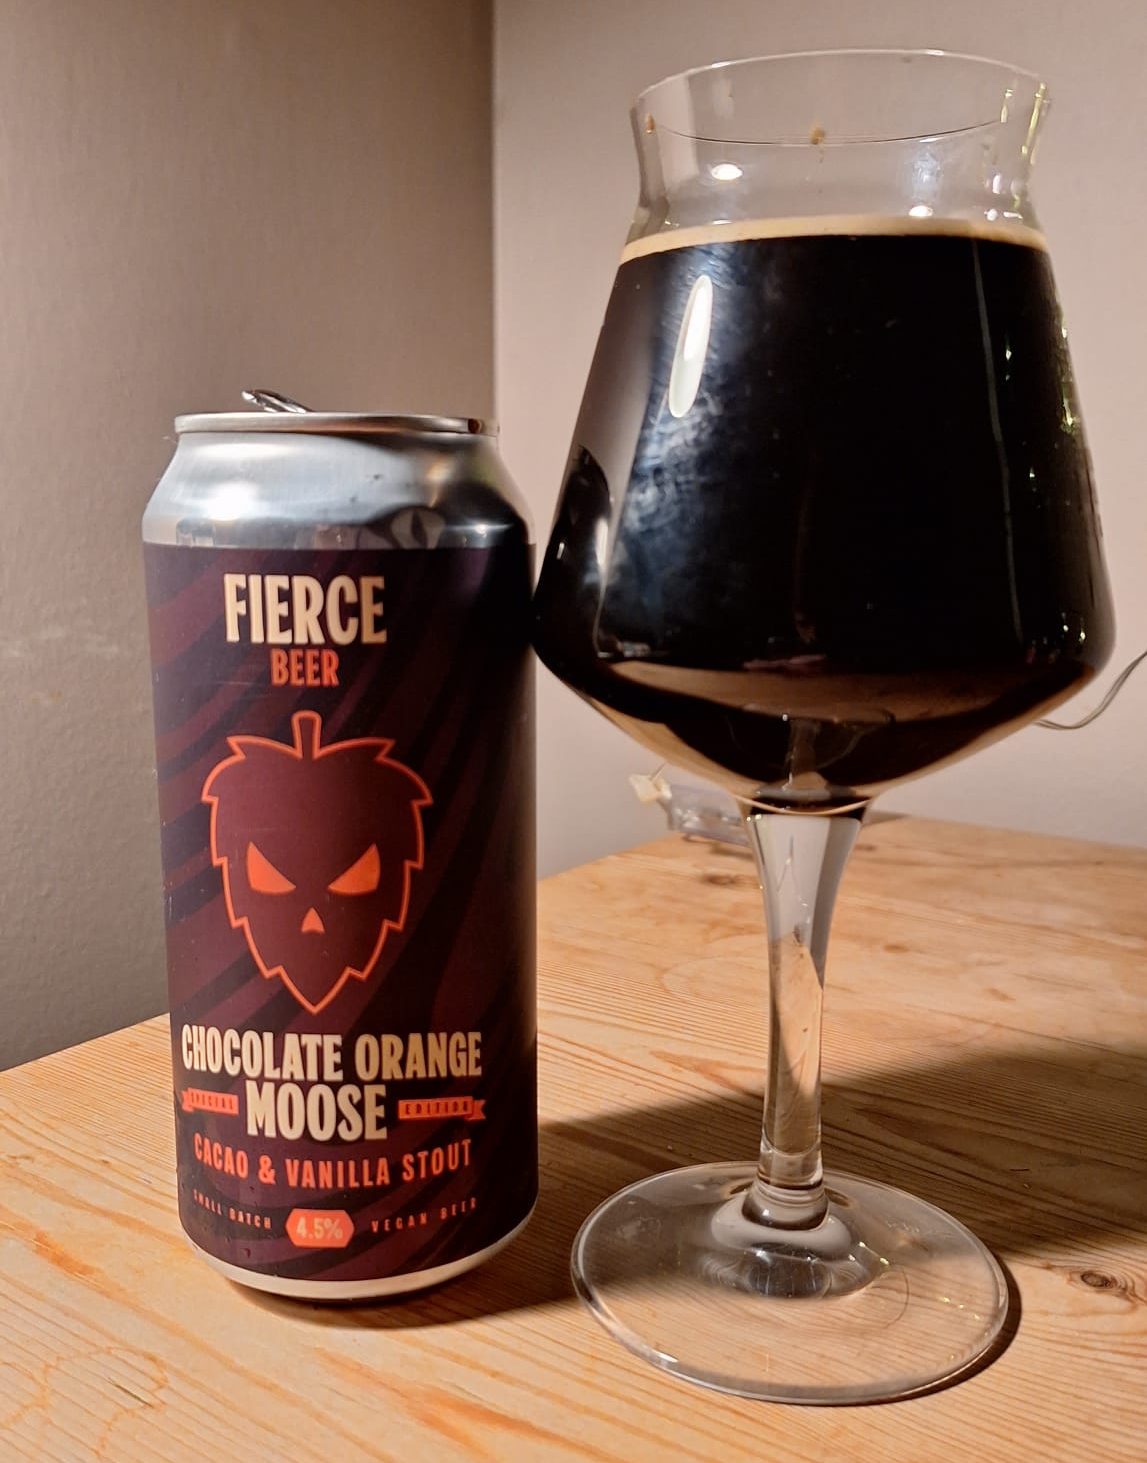 The Fierce Beer chocolate orange stout poured out into a glass.